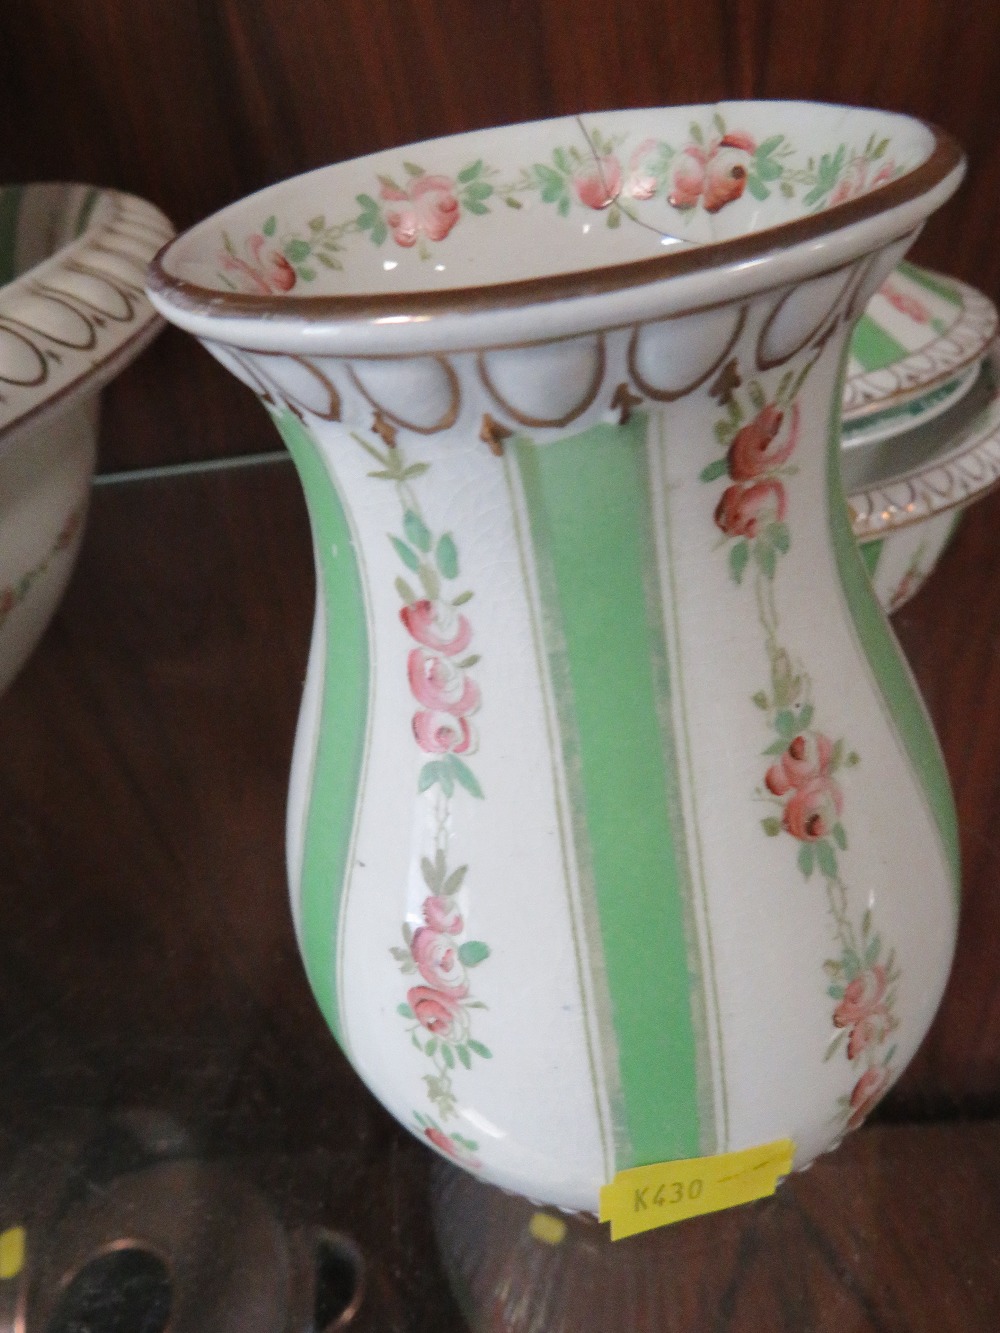 A VINTAGE JUG AND BOWL SET WITH ACCESSORIES - Image 5 of 5